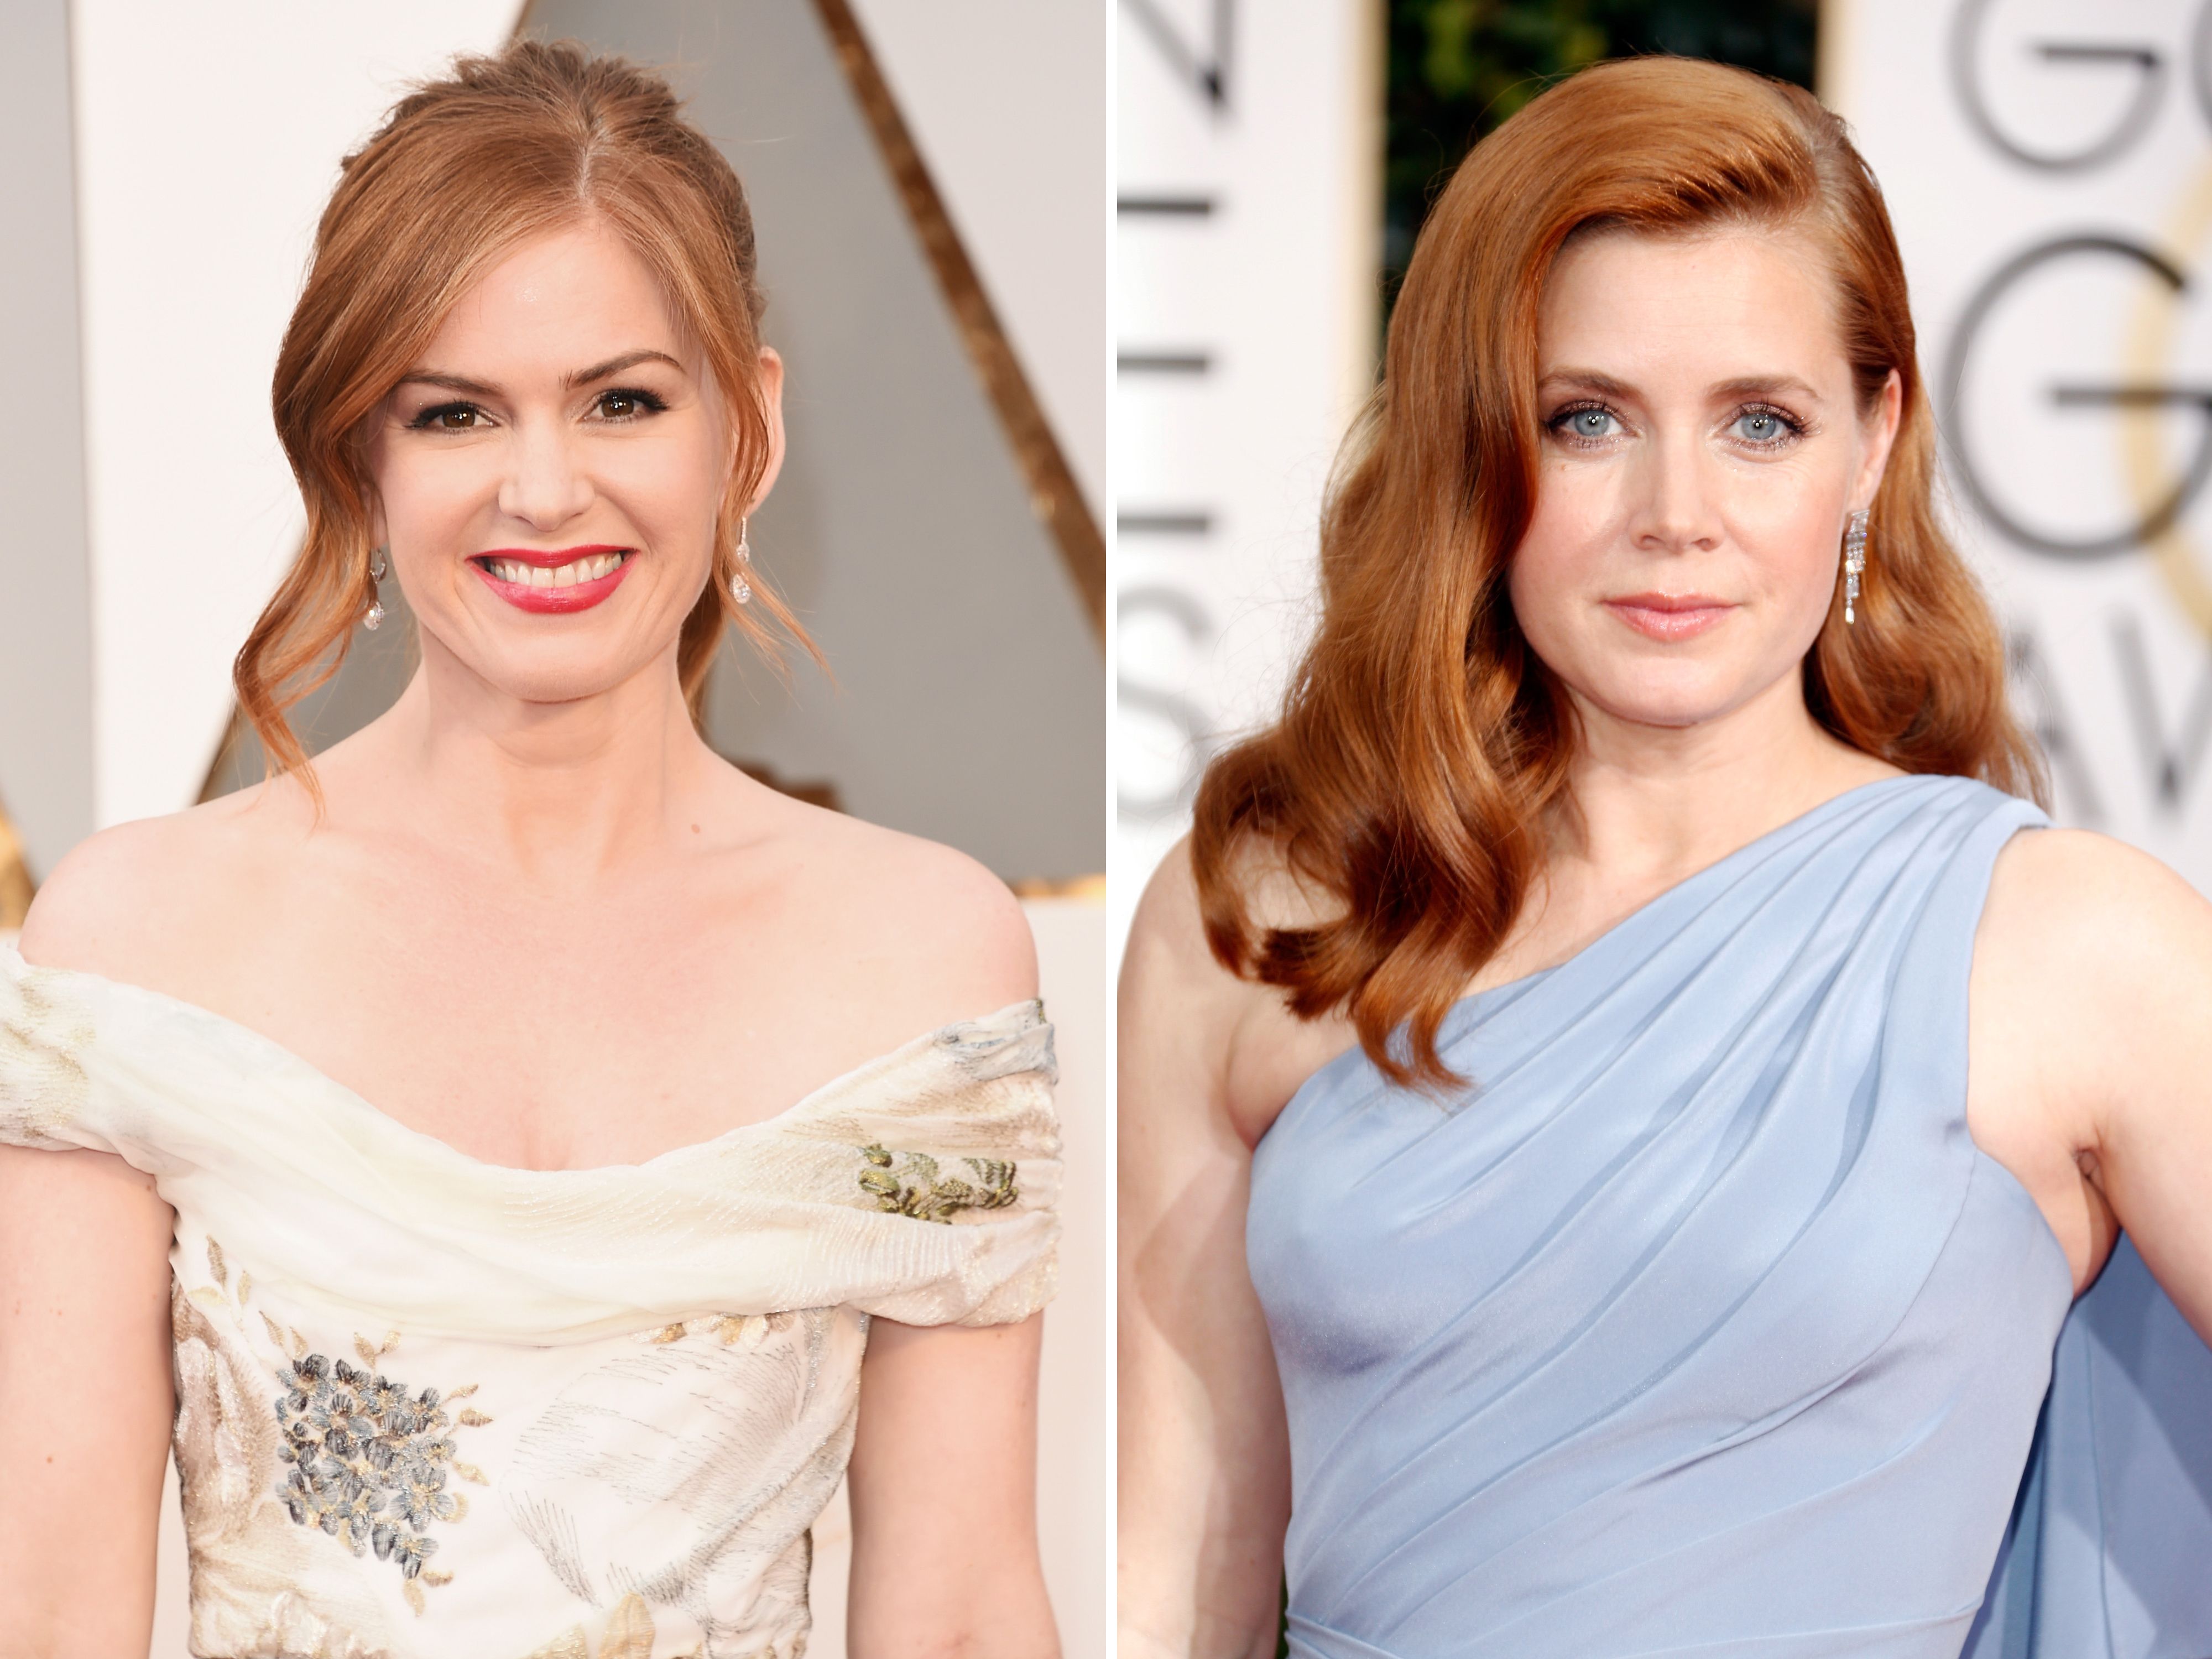 Tom Ford casts lookalikes Amy Adams and Isla fisher in his second film – Nocturnal  Animals